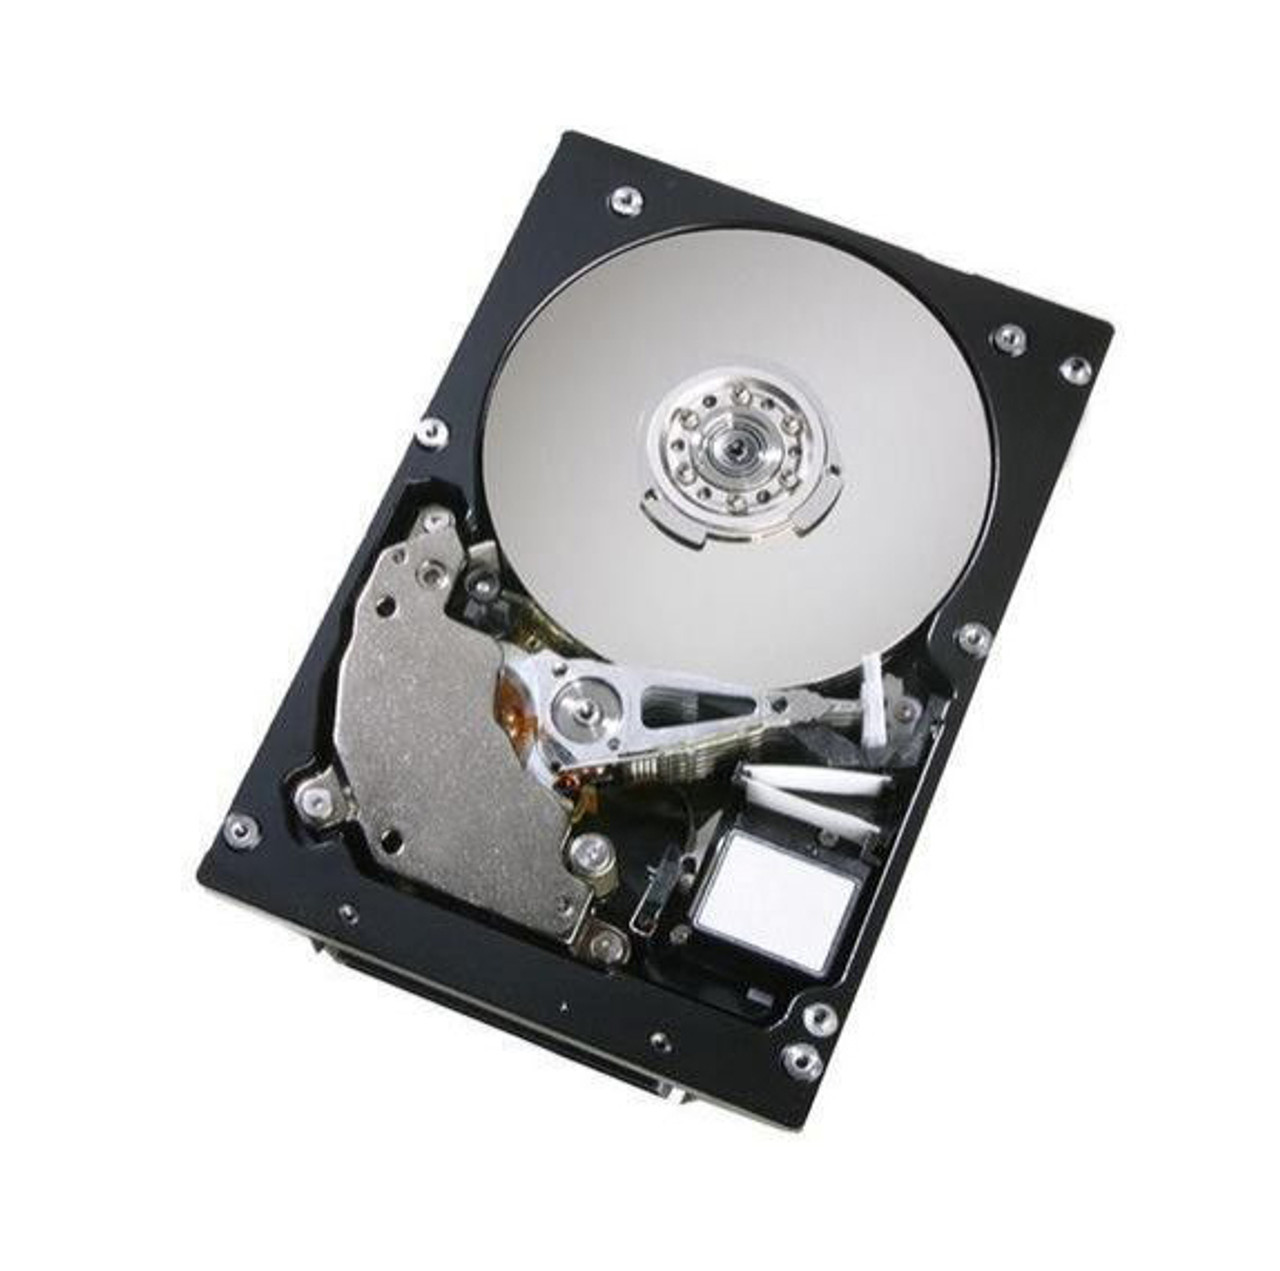 PH08K146 Dell 36GB 10000RPM Ultra-160 SCSI 80-Pin Hot Swap 4MB Cache 3.5-inch Internal Hard Drive with Tray